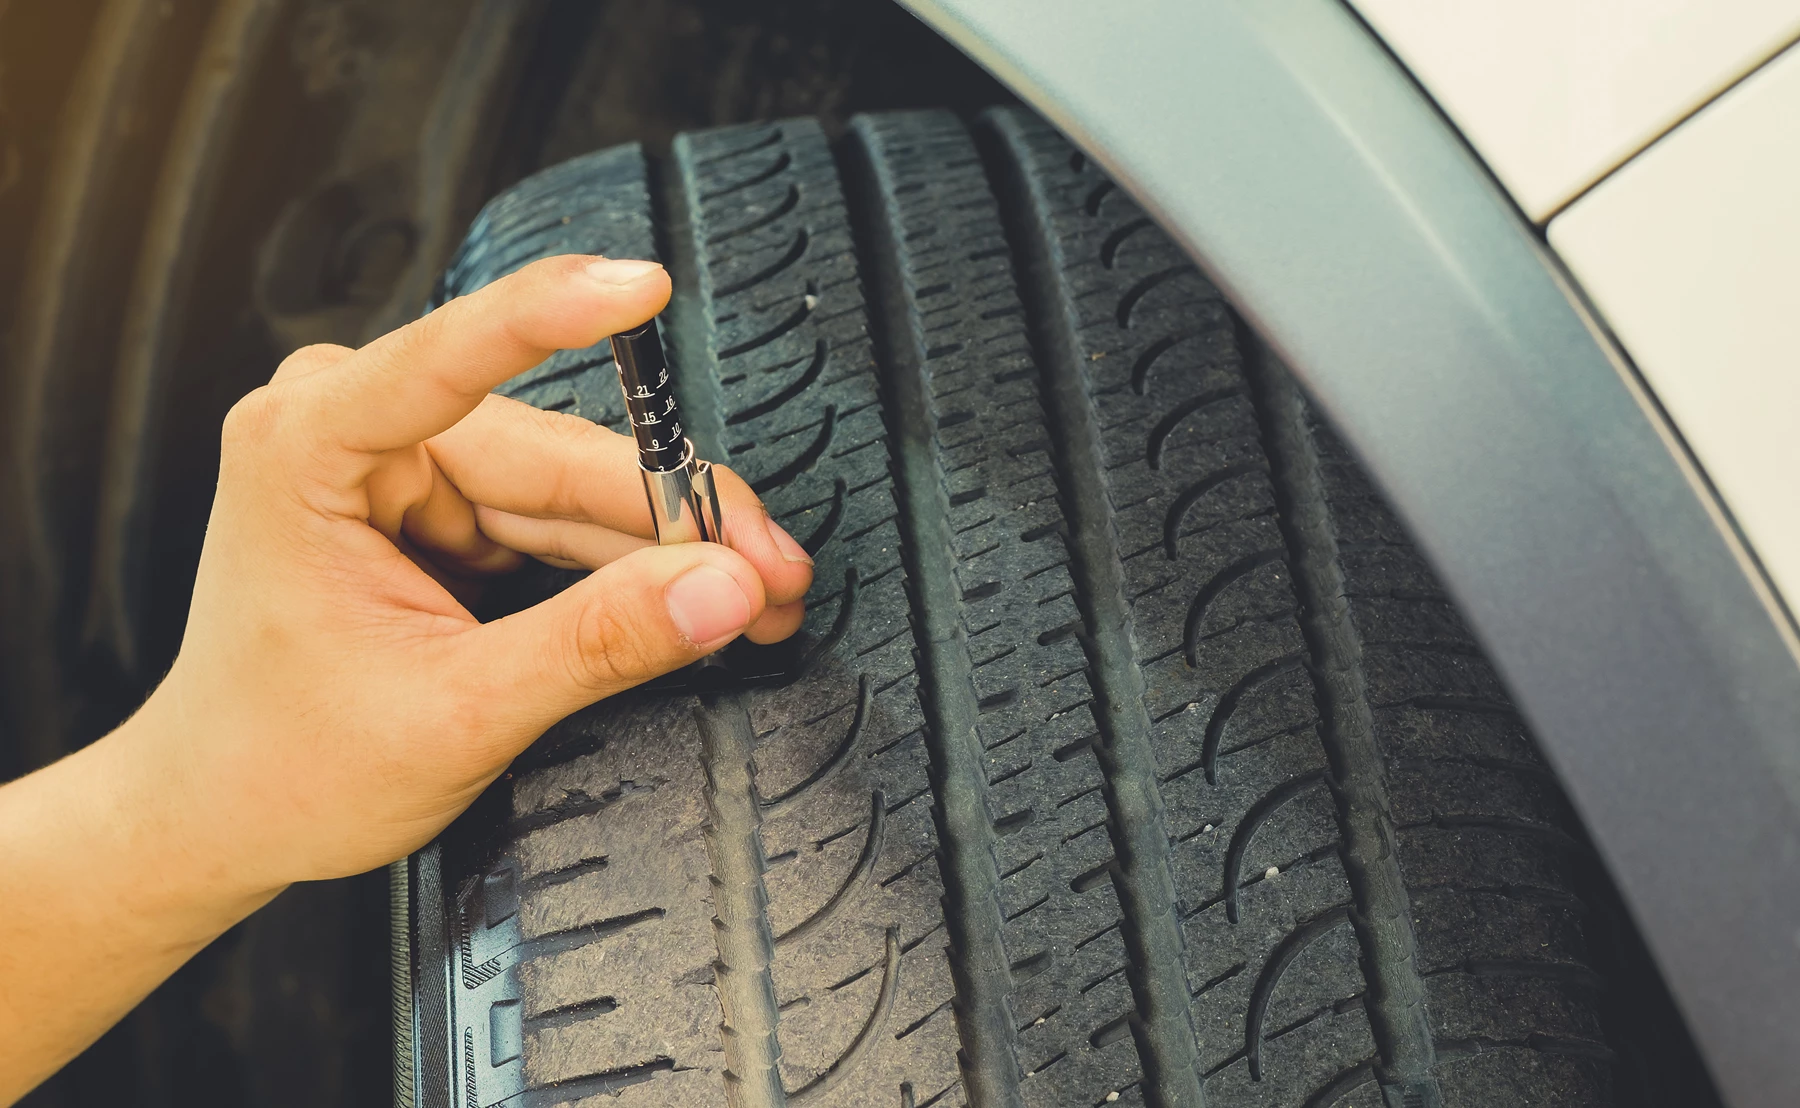 A person using a tool to check the tread depth on a wheel of their car